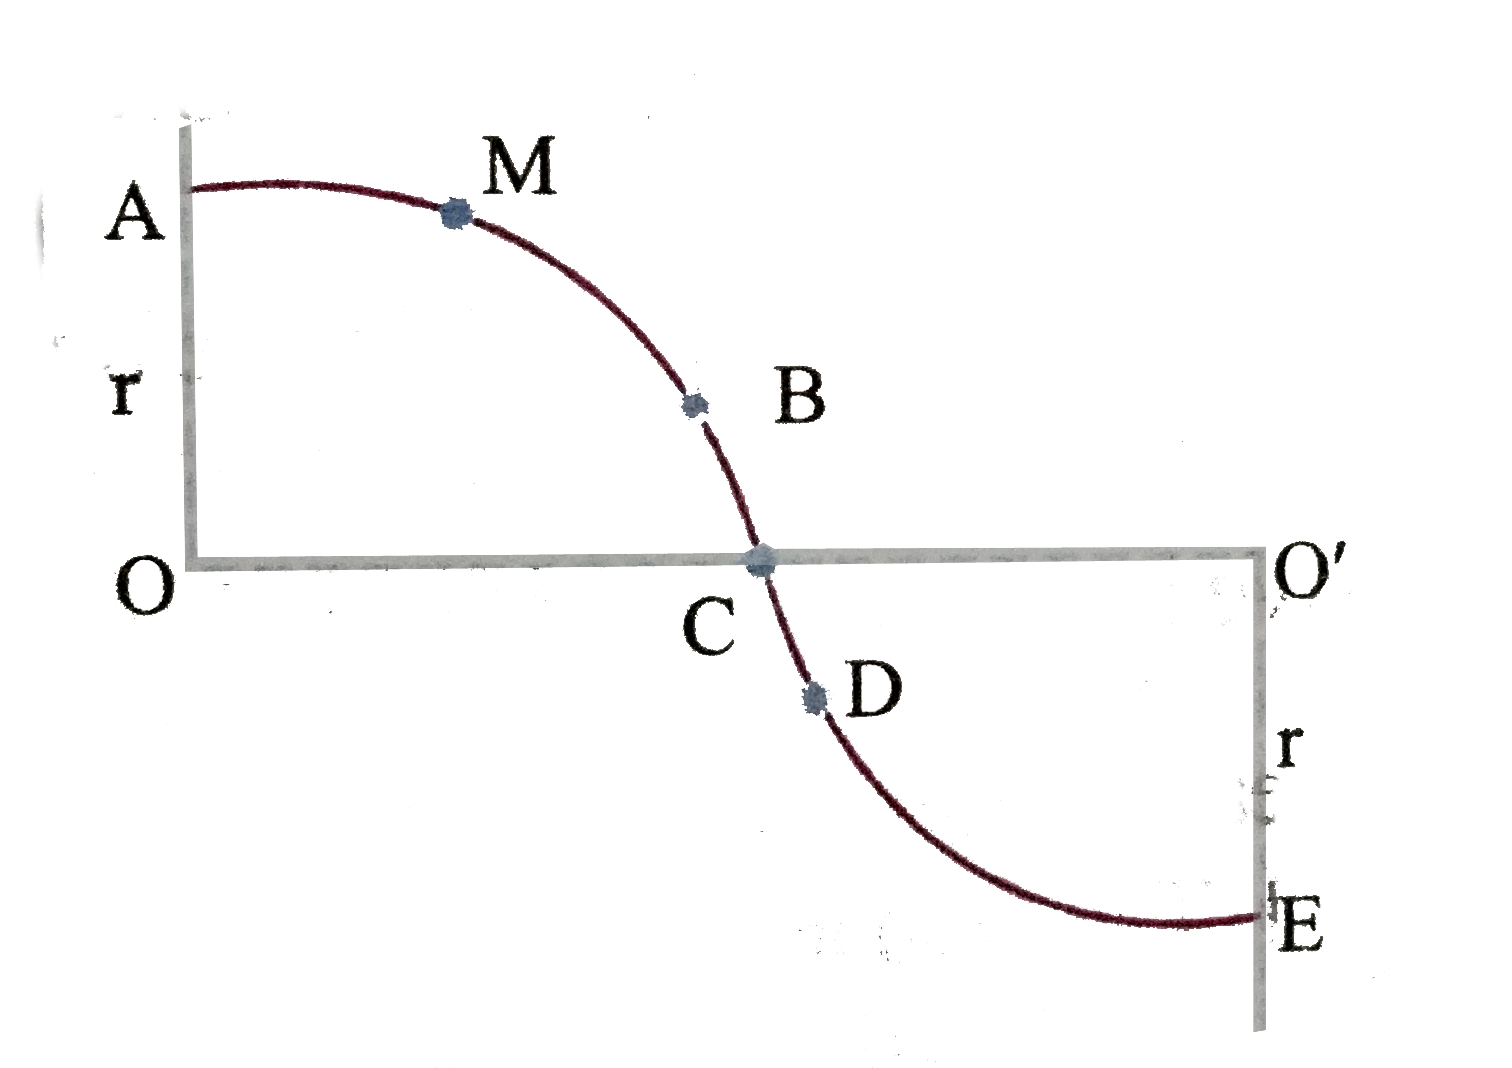 ABCDE is a smooth iron track in the vertical plane. The sections ABC and CDE are quarter circles. Points B and D are very close to C.M is a small magnet of mass m. The force of attraction between M and the track is F, which is constant and always normal to the track. M starts from rest at A, then: